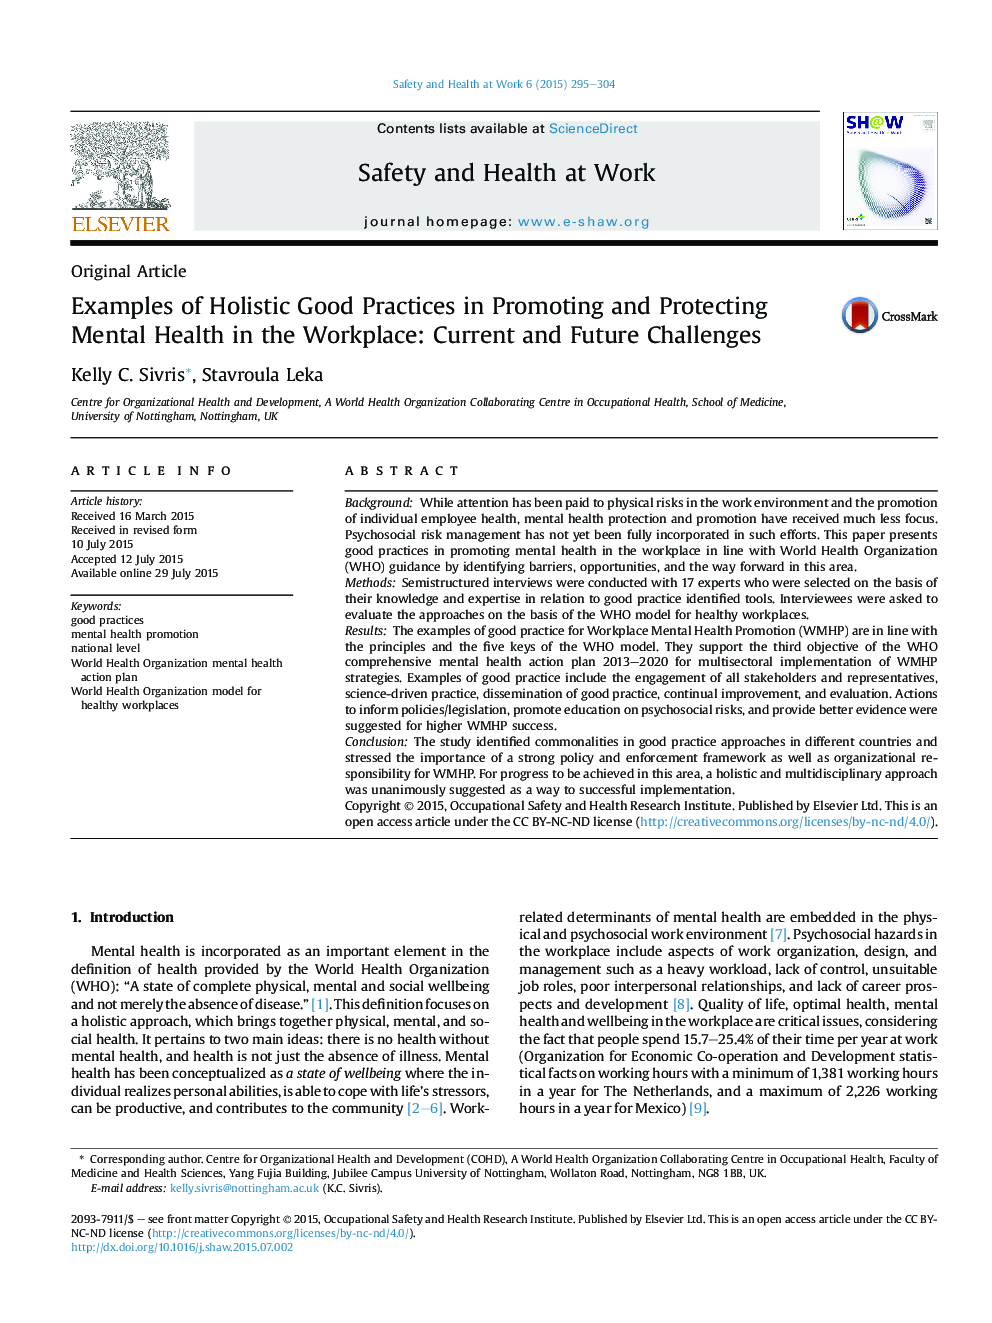 Examples of Holistic Good Practices in Promoting and Protecting Mental Health in the Workplace: Current and Future Challenges 